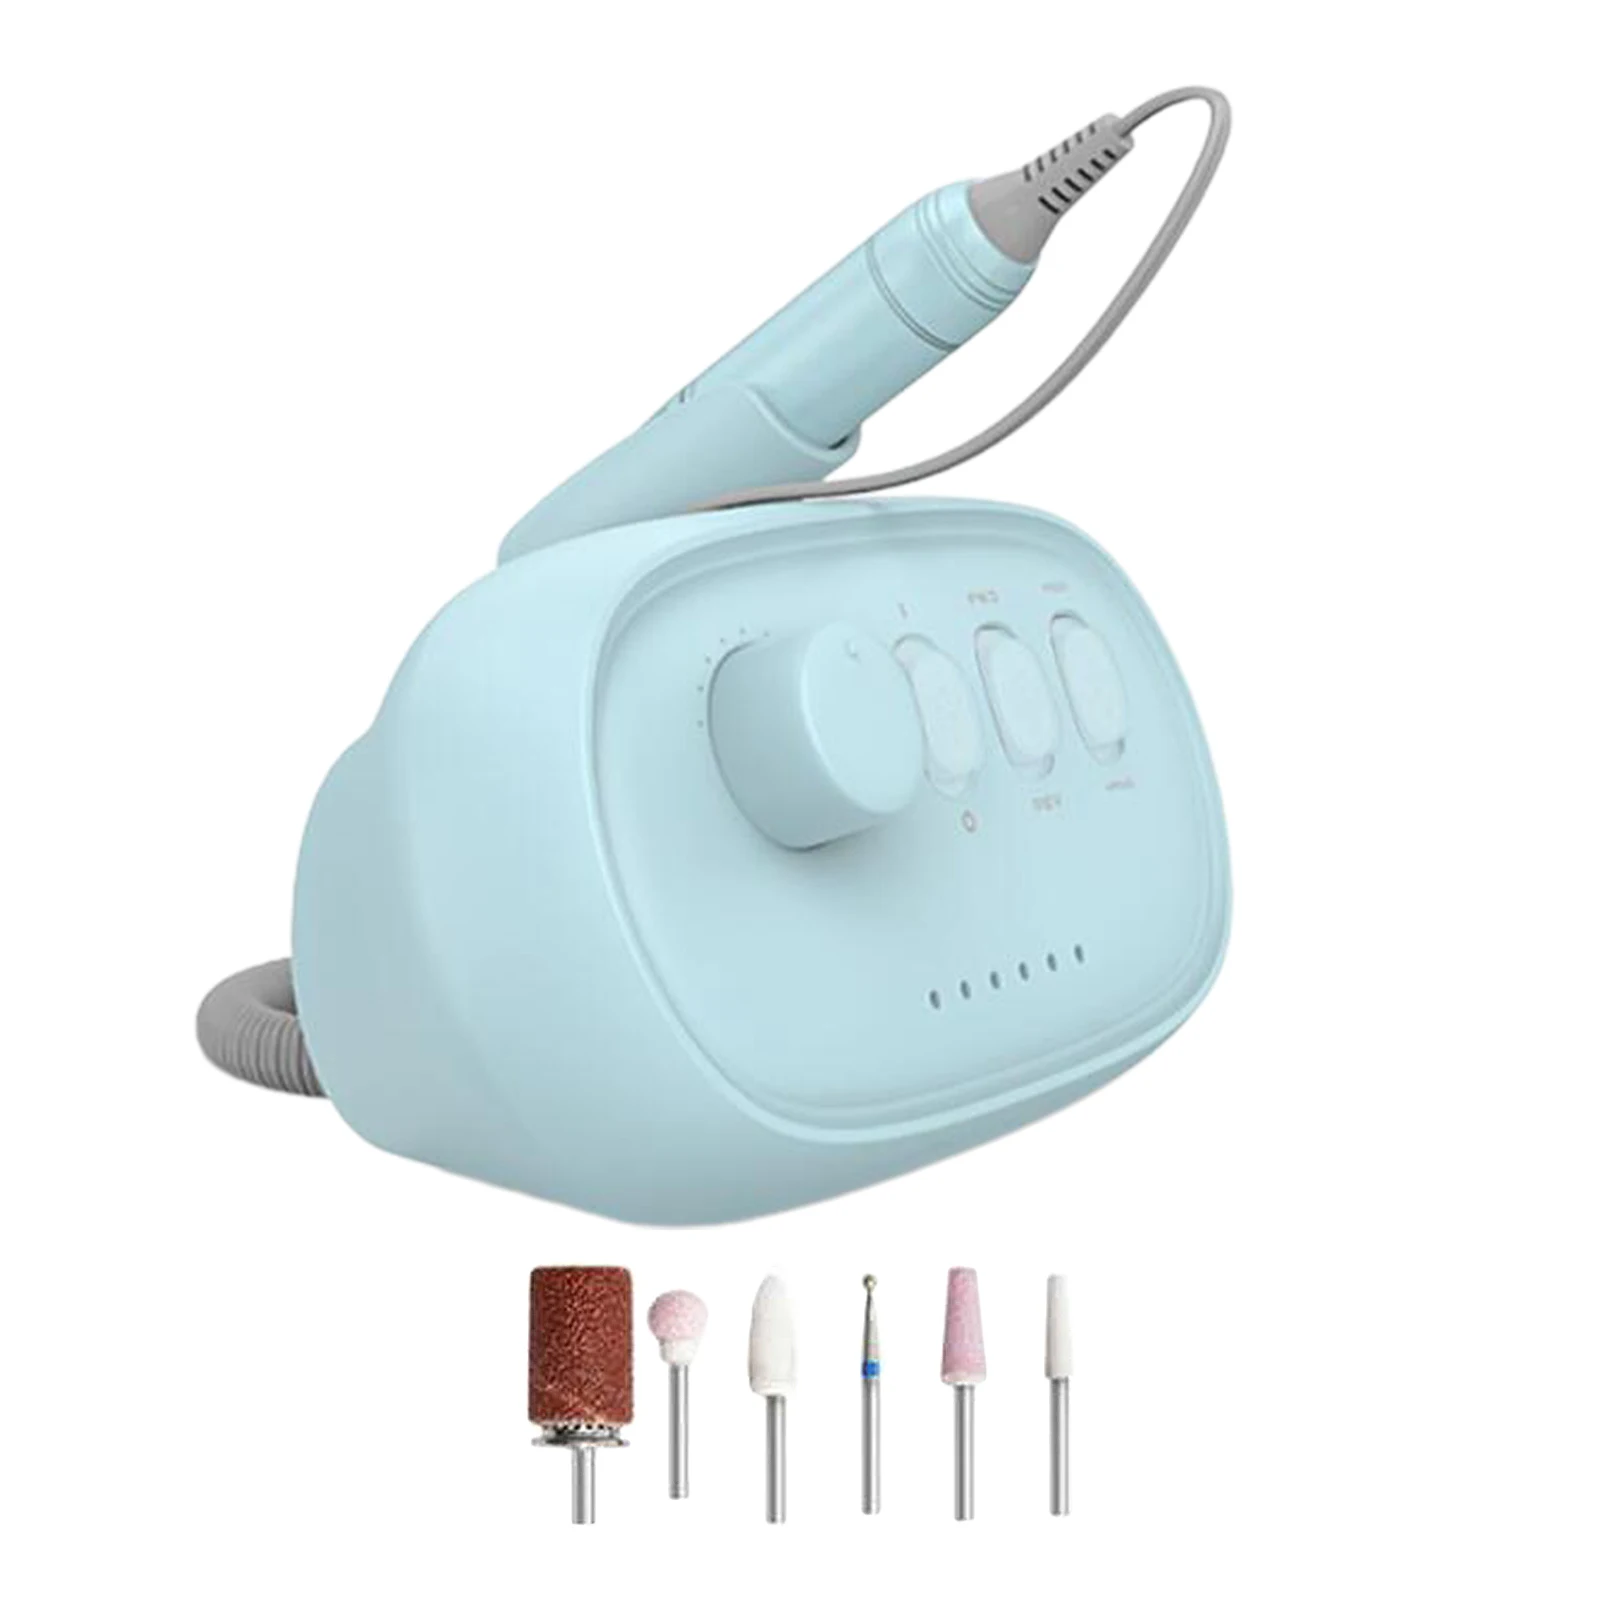 Professional Electric Nail Drill Nail File Machine Pedicure Sets Home Blue Nails Polisher Grinder Nail File Manicure Tools 